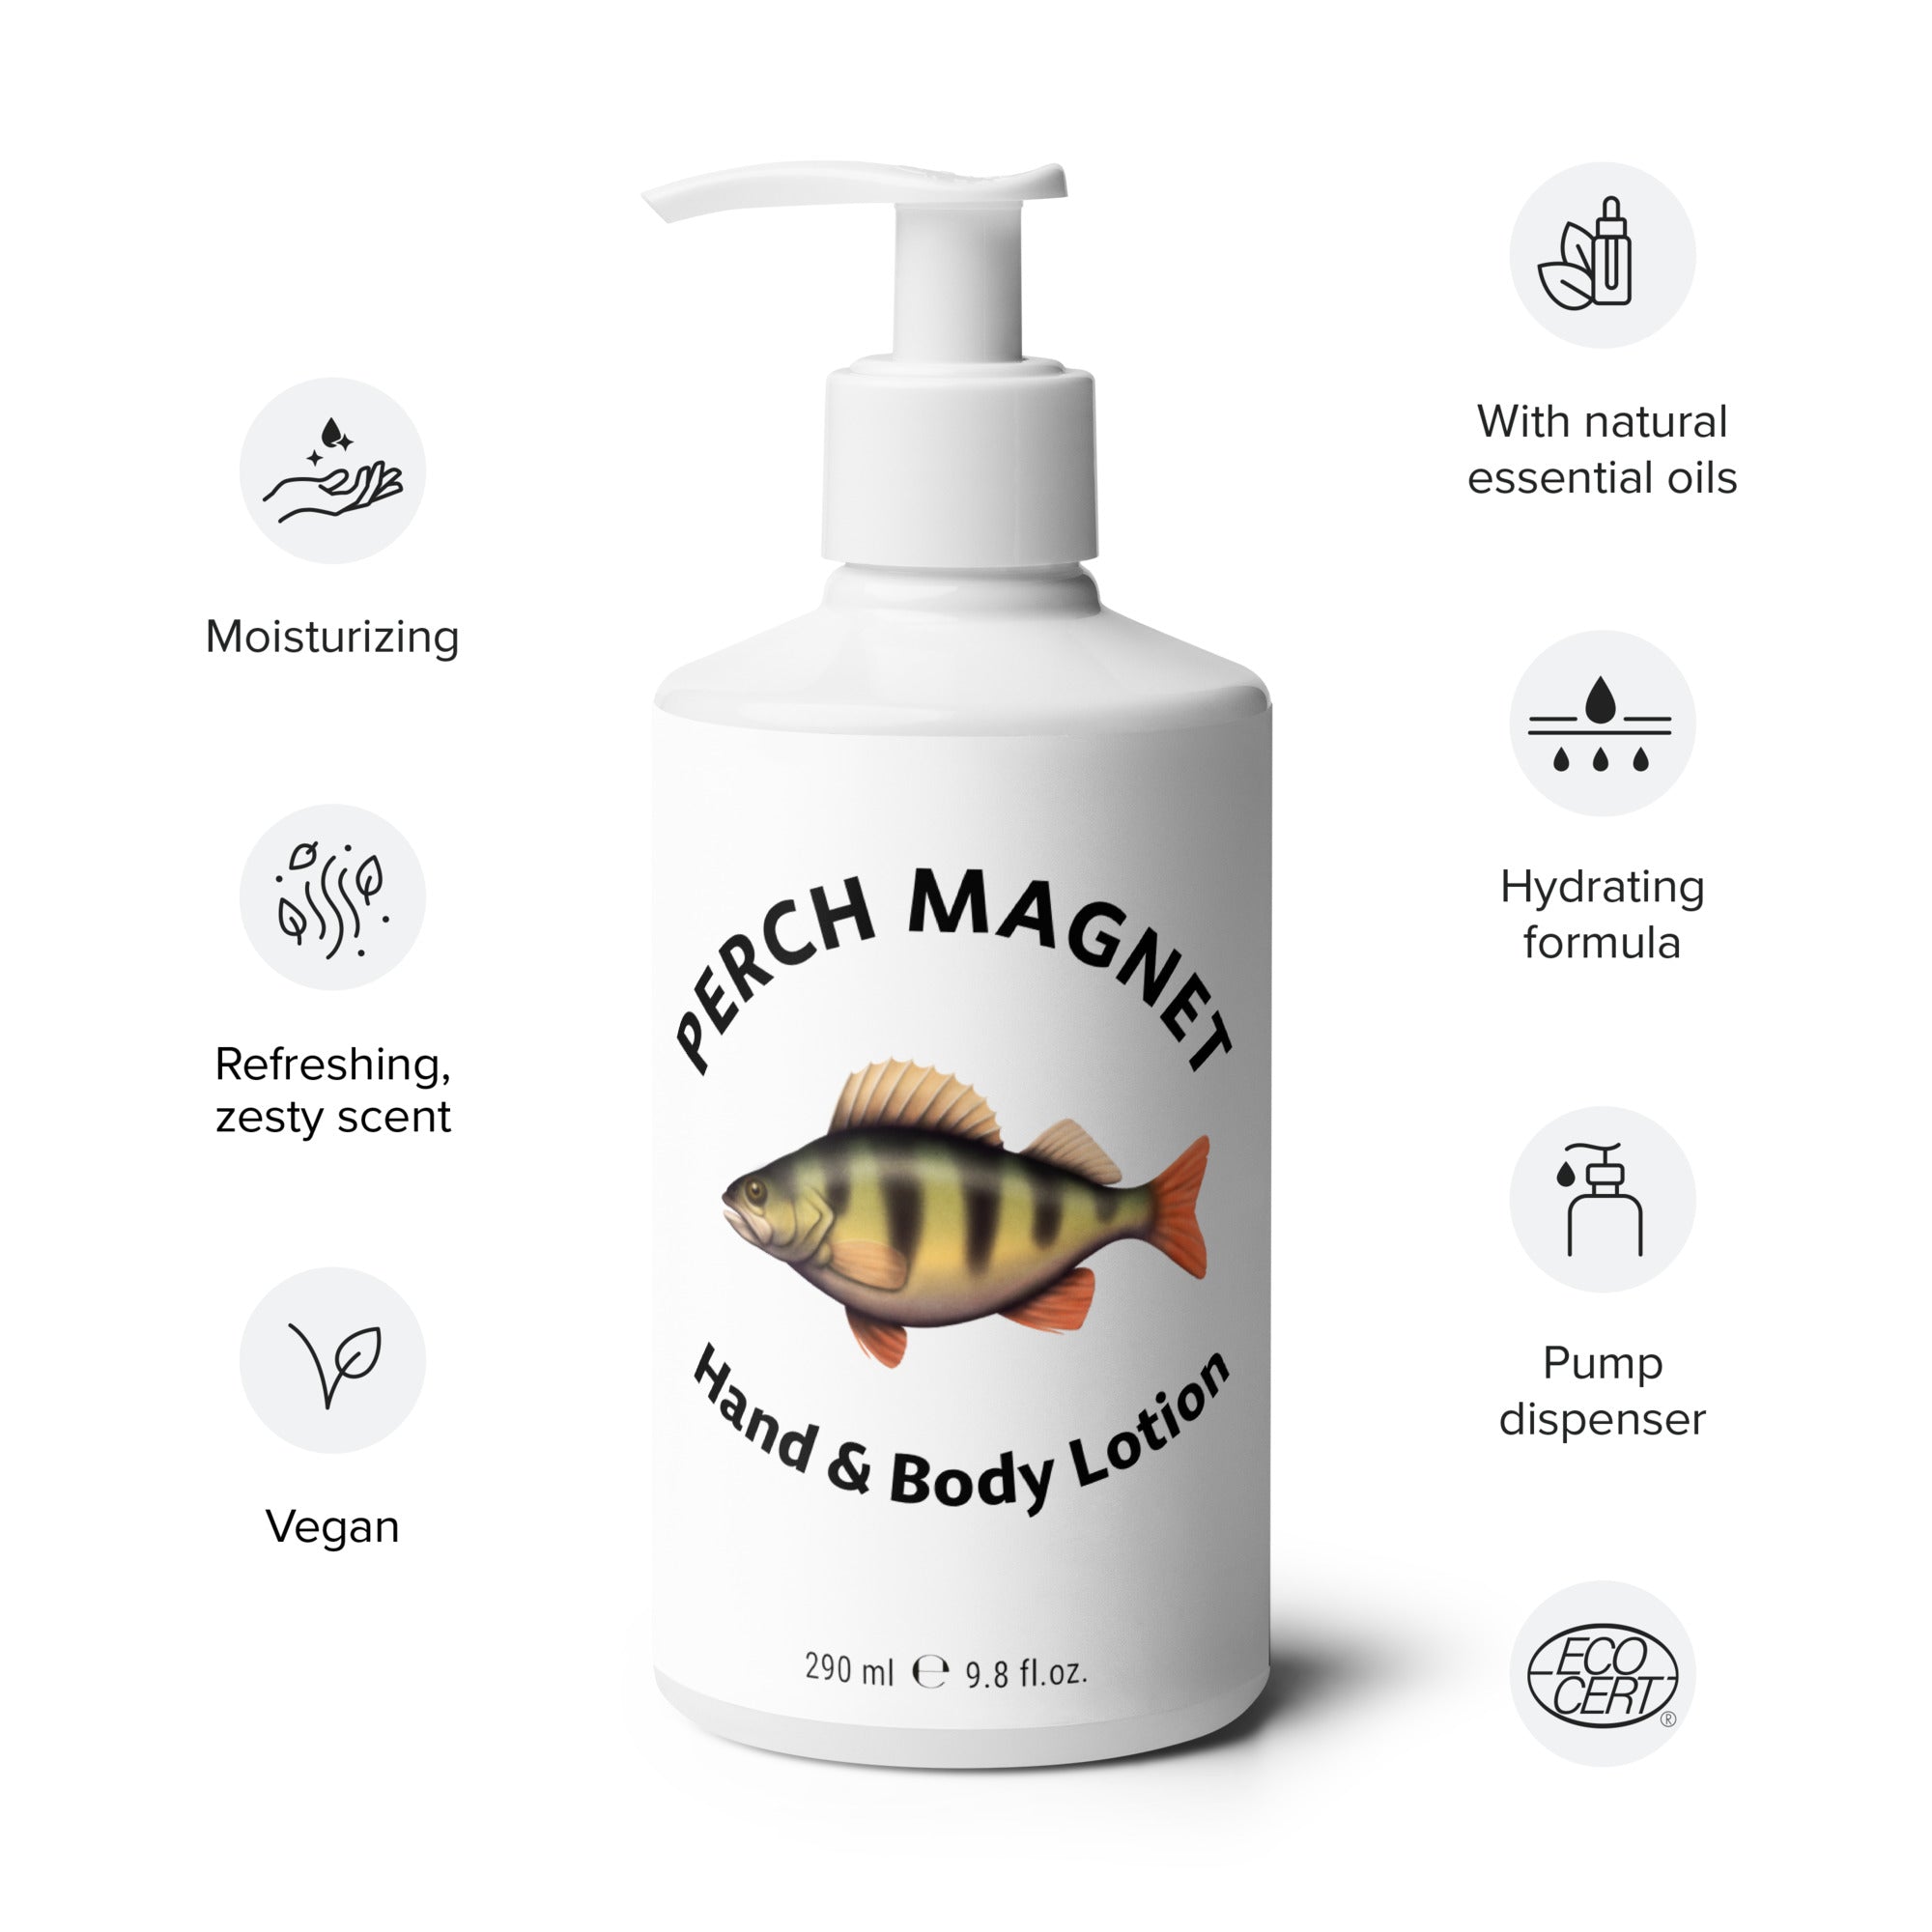 Perch Magnet - The Ultimate Attraction Potion - Oddhook